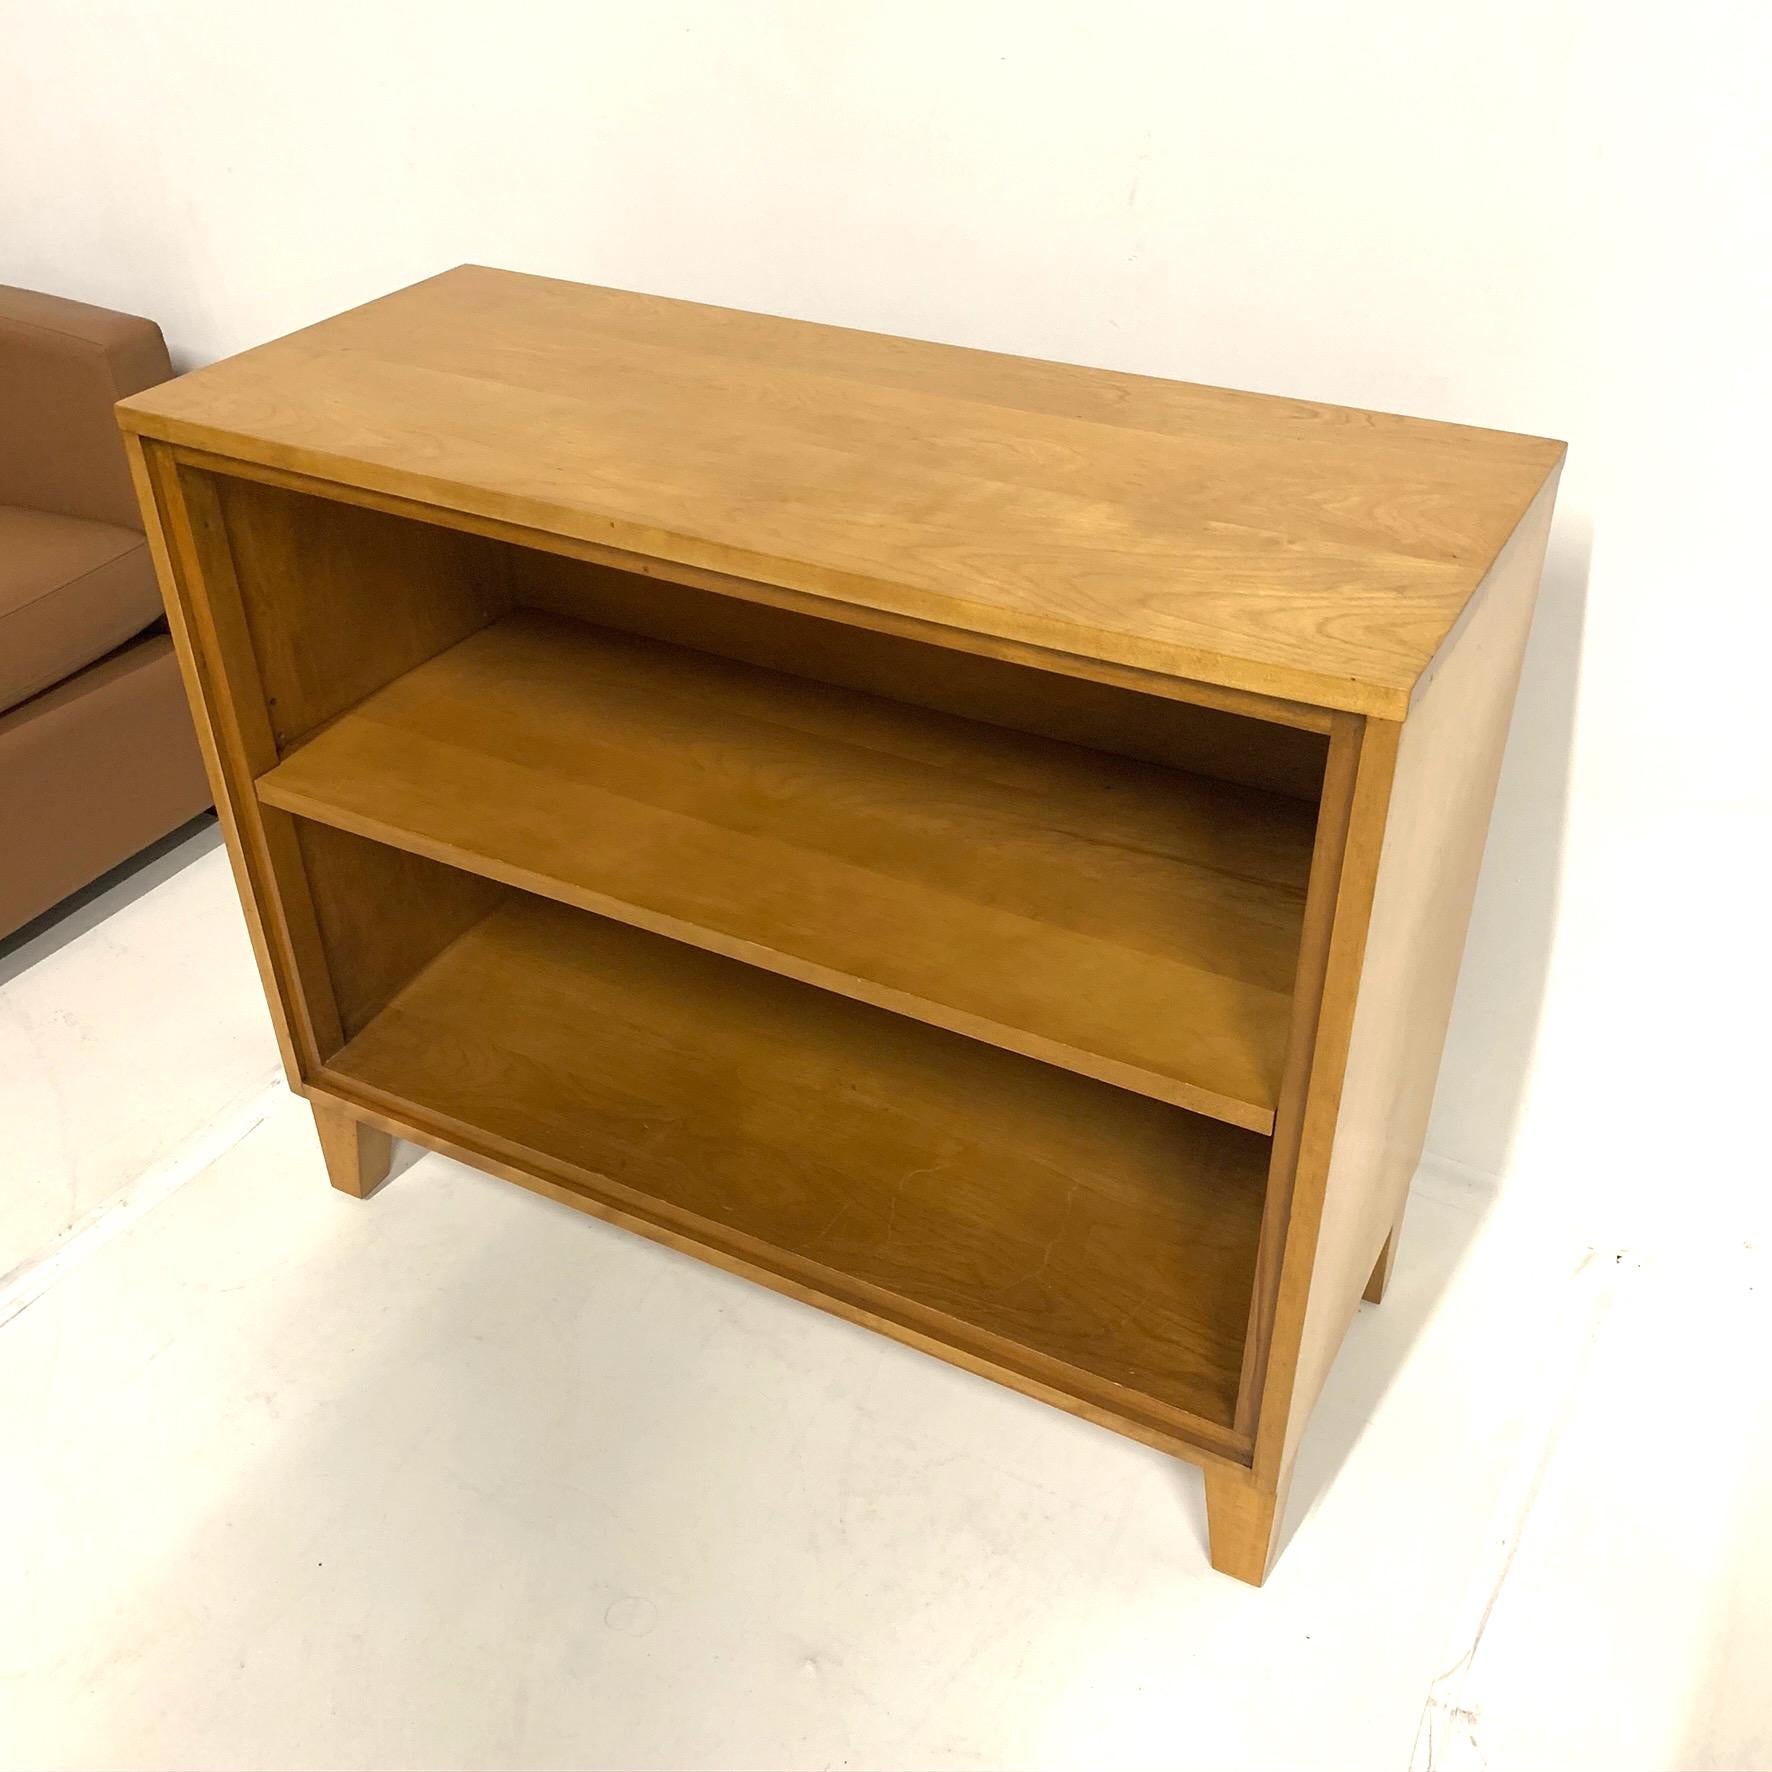 20th Century Russel Wright for Conant Ball Blonde Maple Bookcases Shelves Display Shelf, Pair